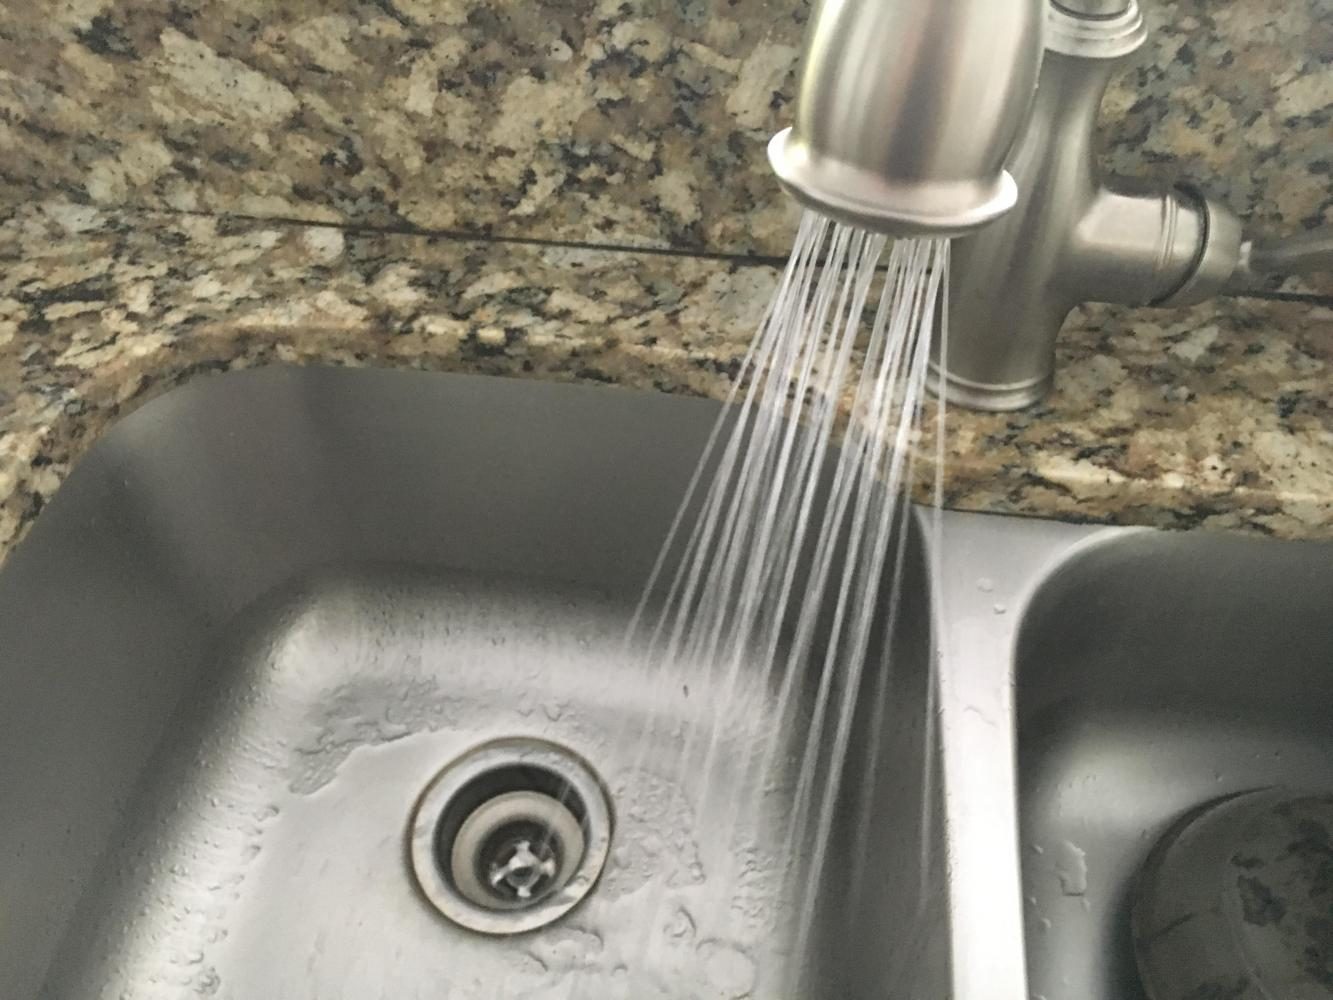 Mount Pleasant Water Tested for Possible Contamination